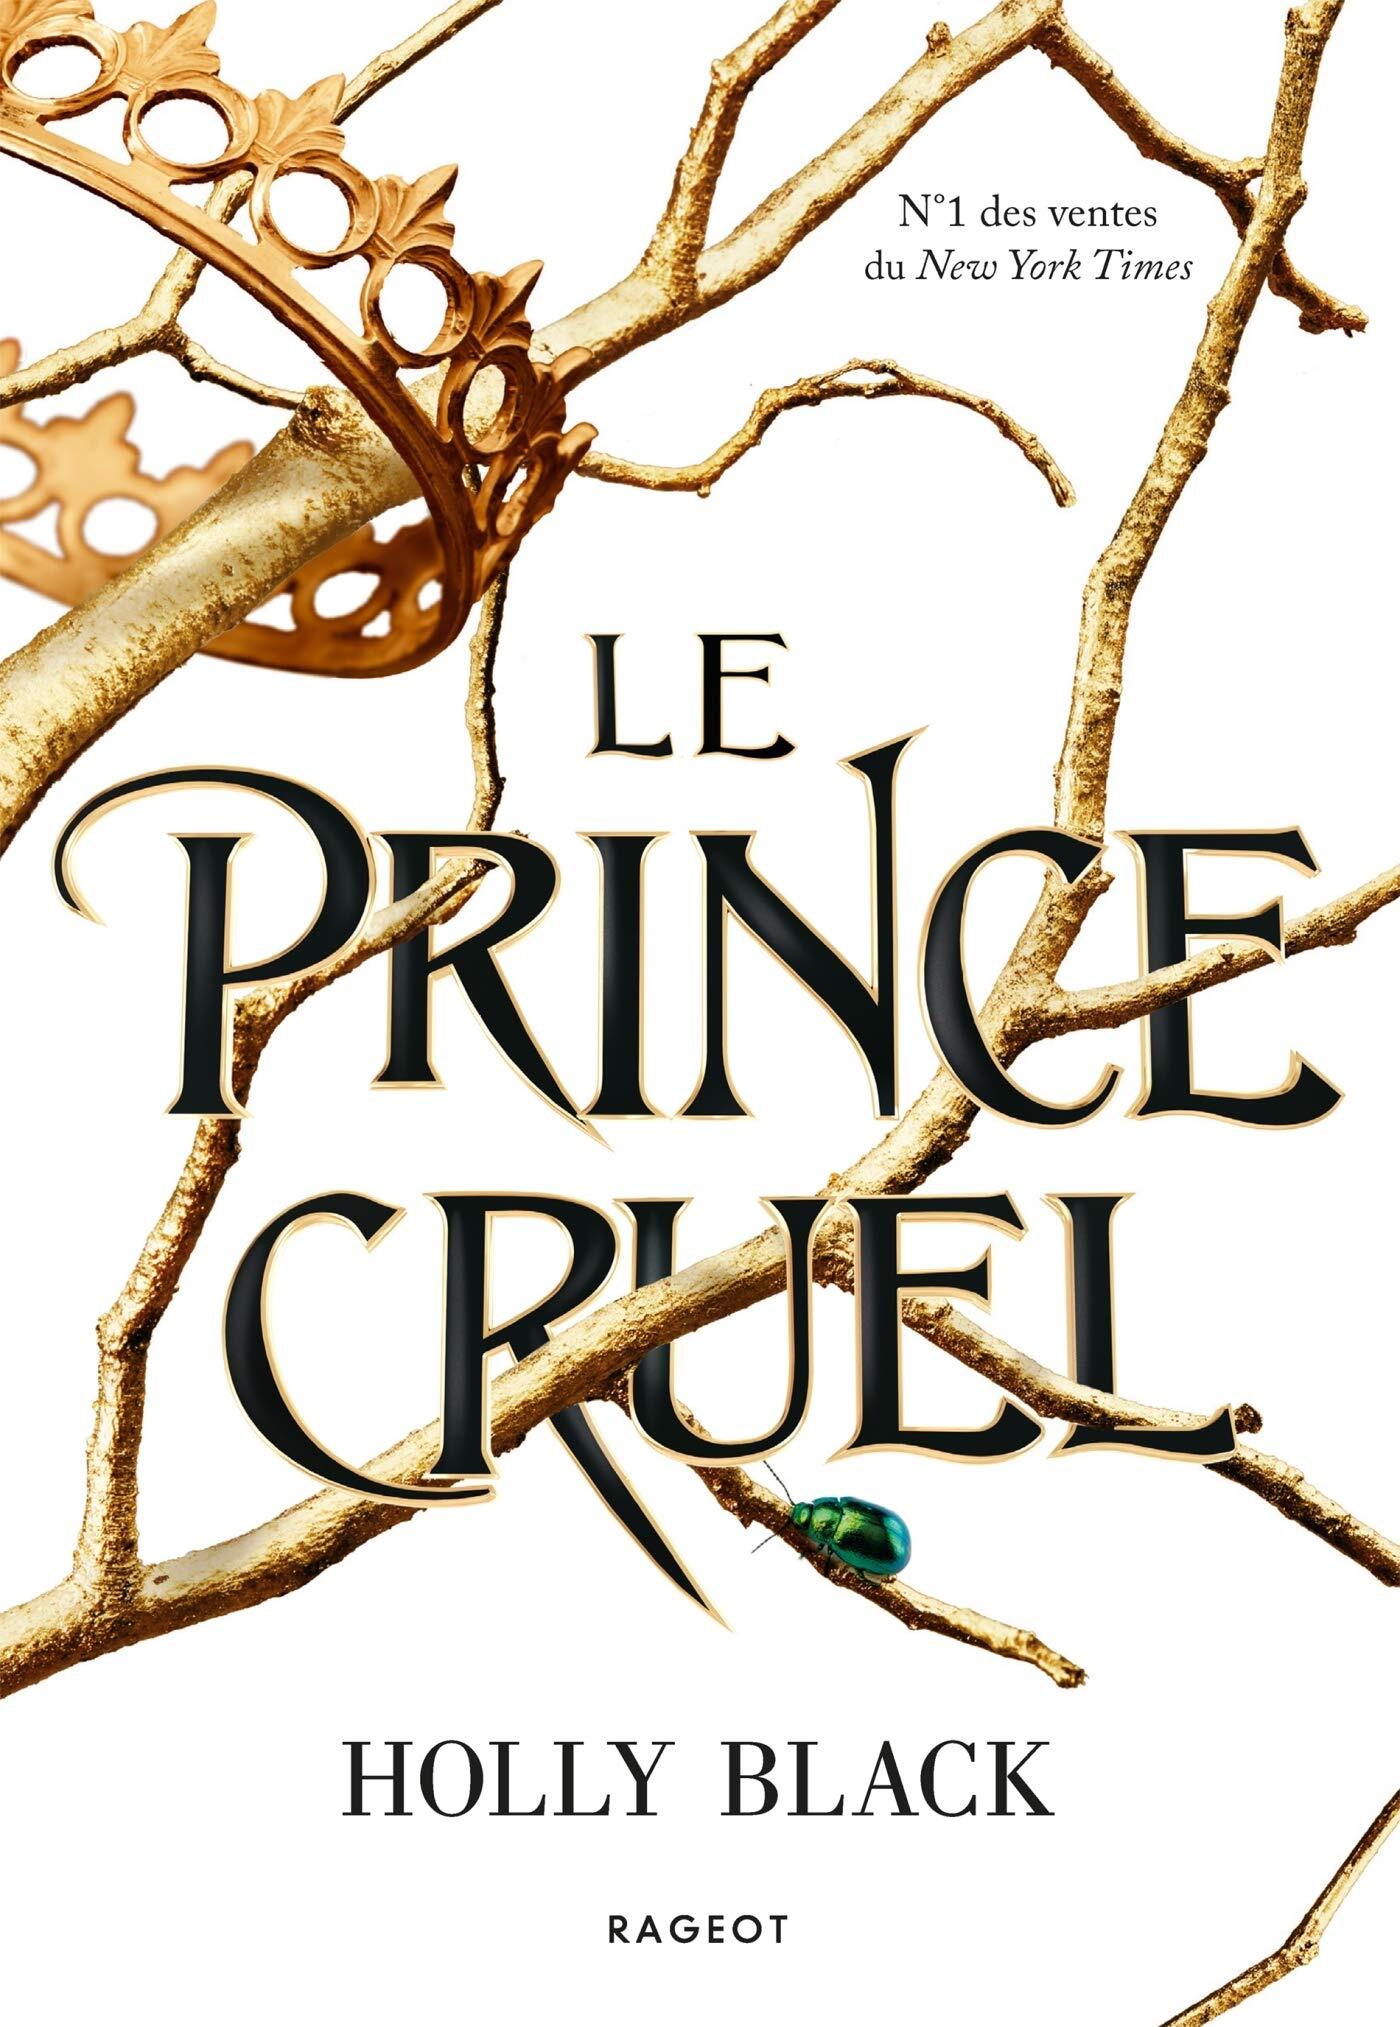 LECTURE COMMUNE D'AVRIL 2021 The-folk-of-the-air-tome-1-le-prince-cruel-1276506